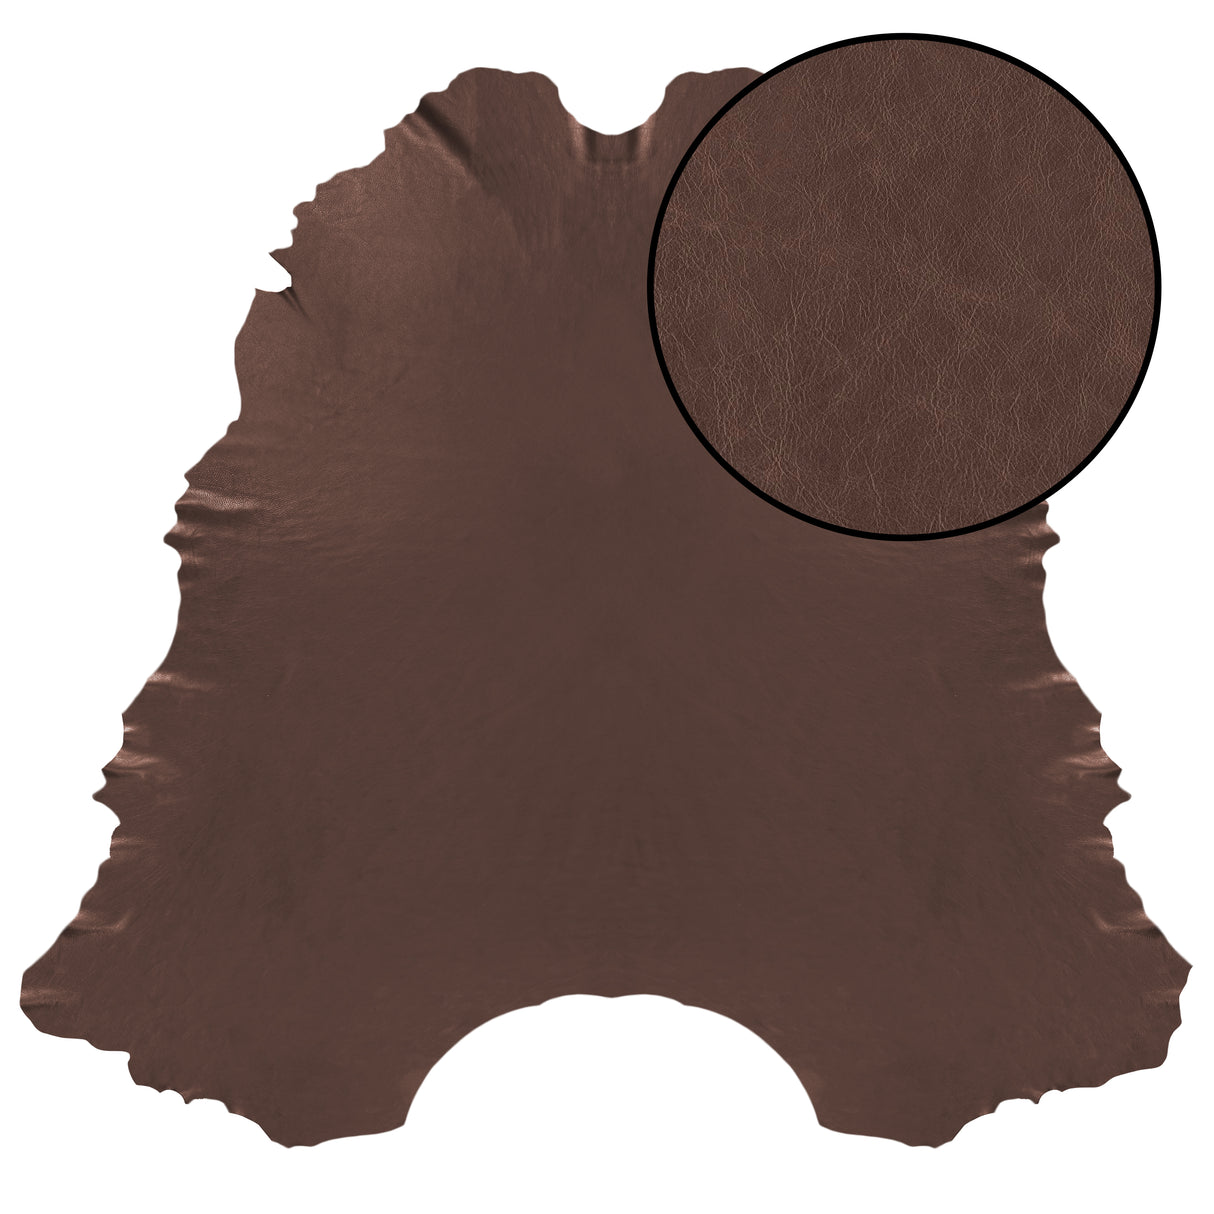 Coffee Brown - Highline Transitional Two Tone Collection - Whole Hide Upholstery Leather ($7.00/SqFt)